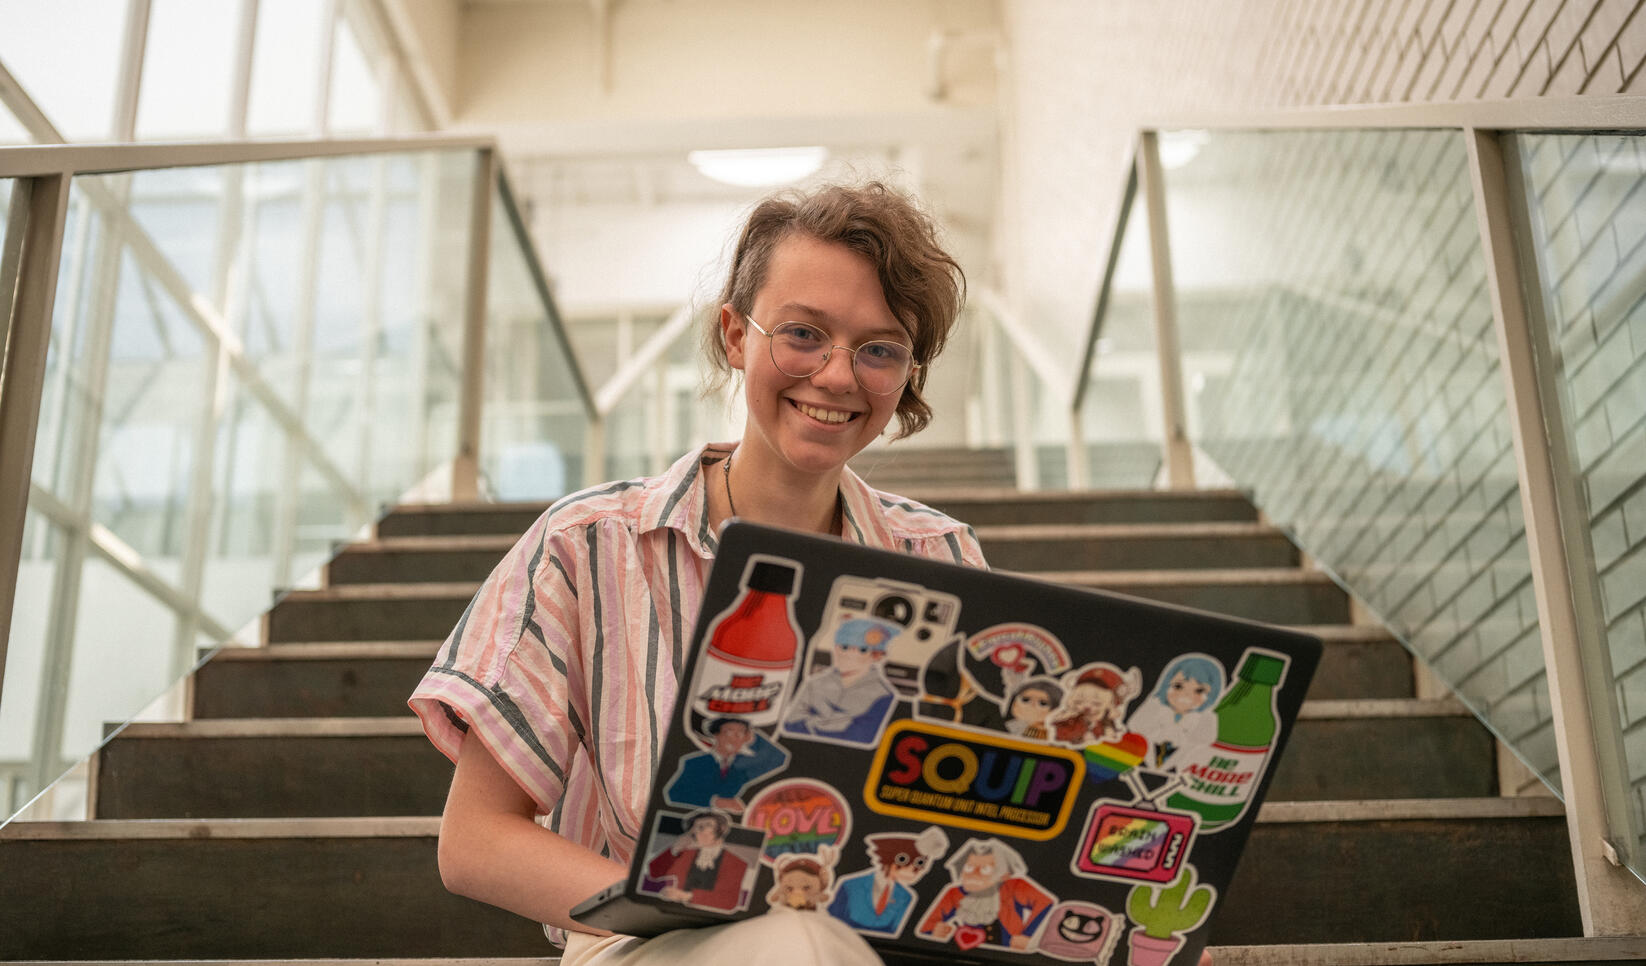 Student sits on stairs looking into camera and smiling with laptop in lap. The camera looks up on the stairs and several colorful stickers can be seen on the laptop.